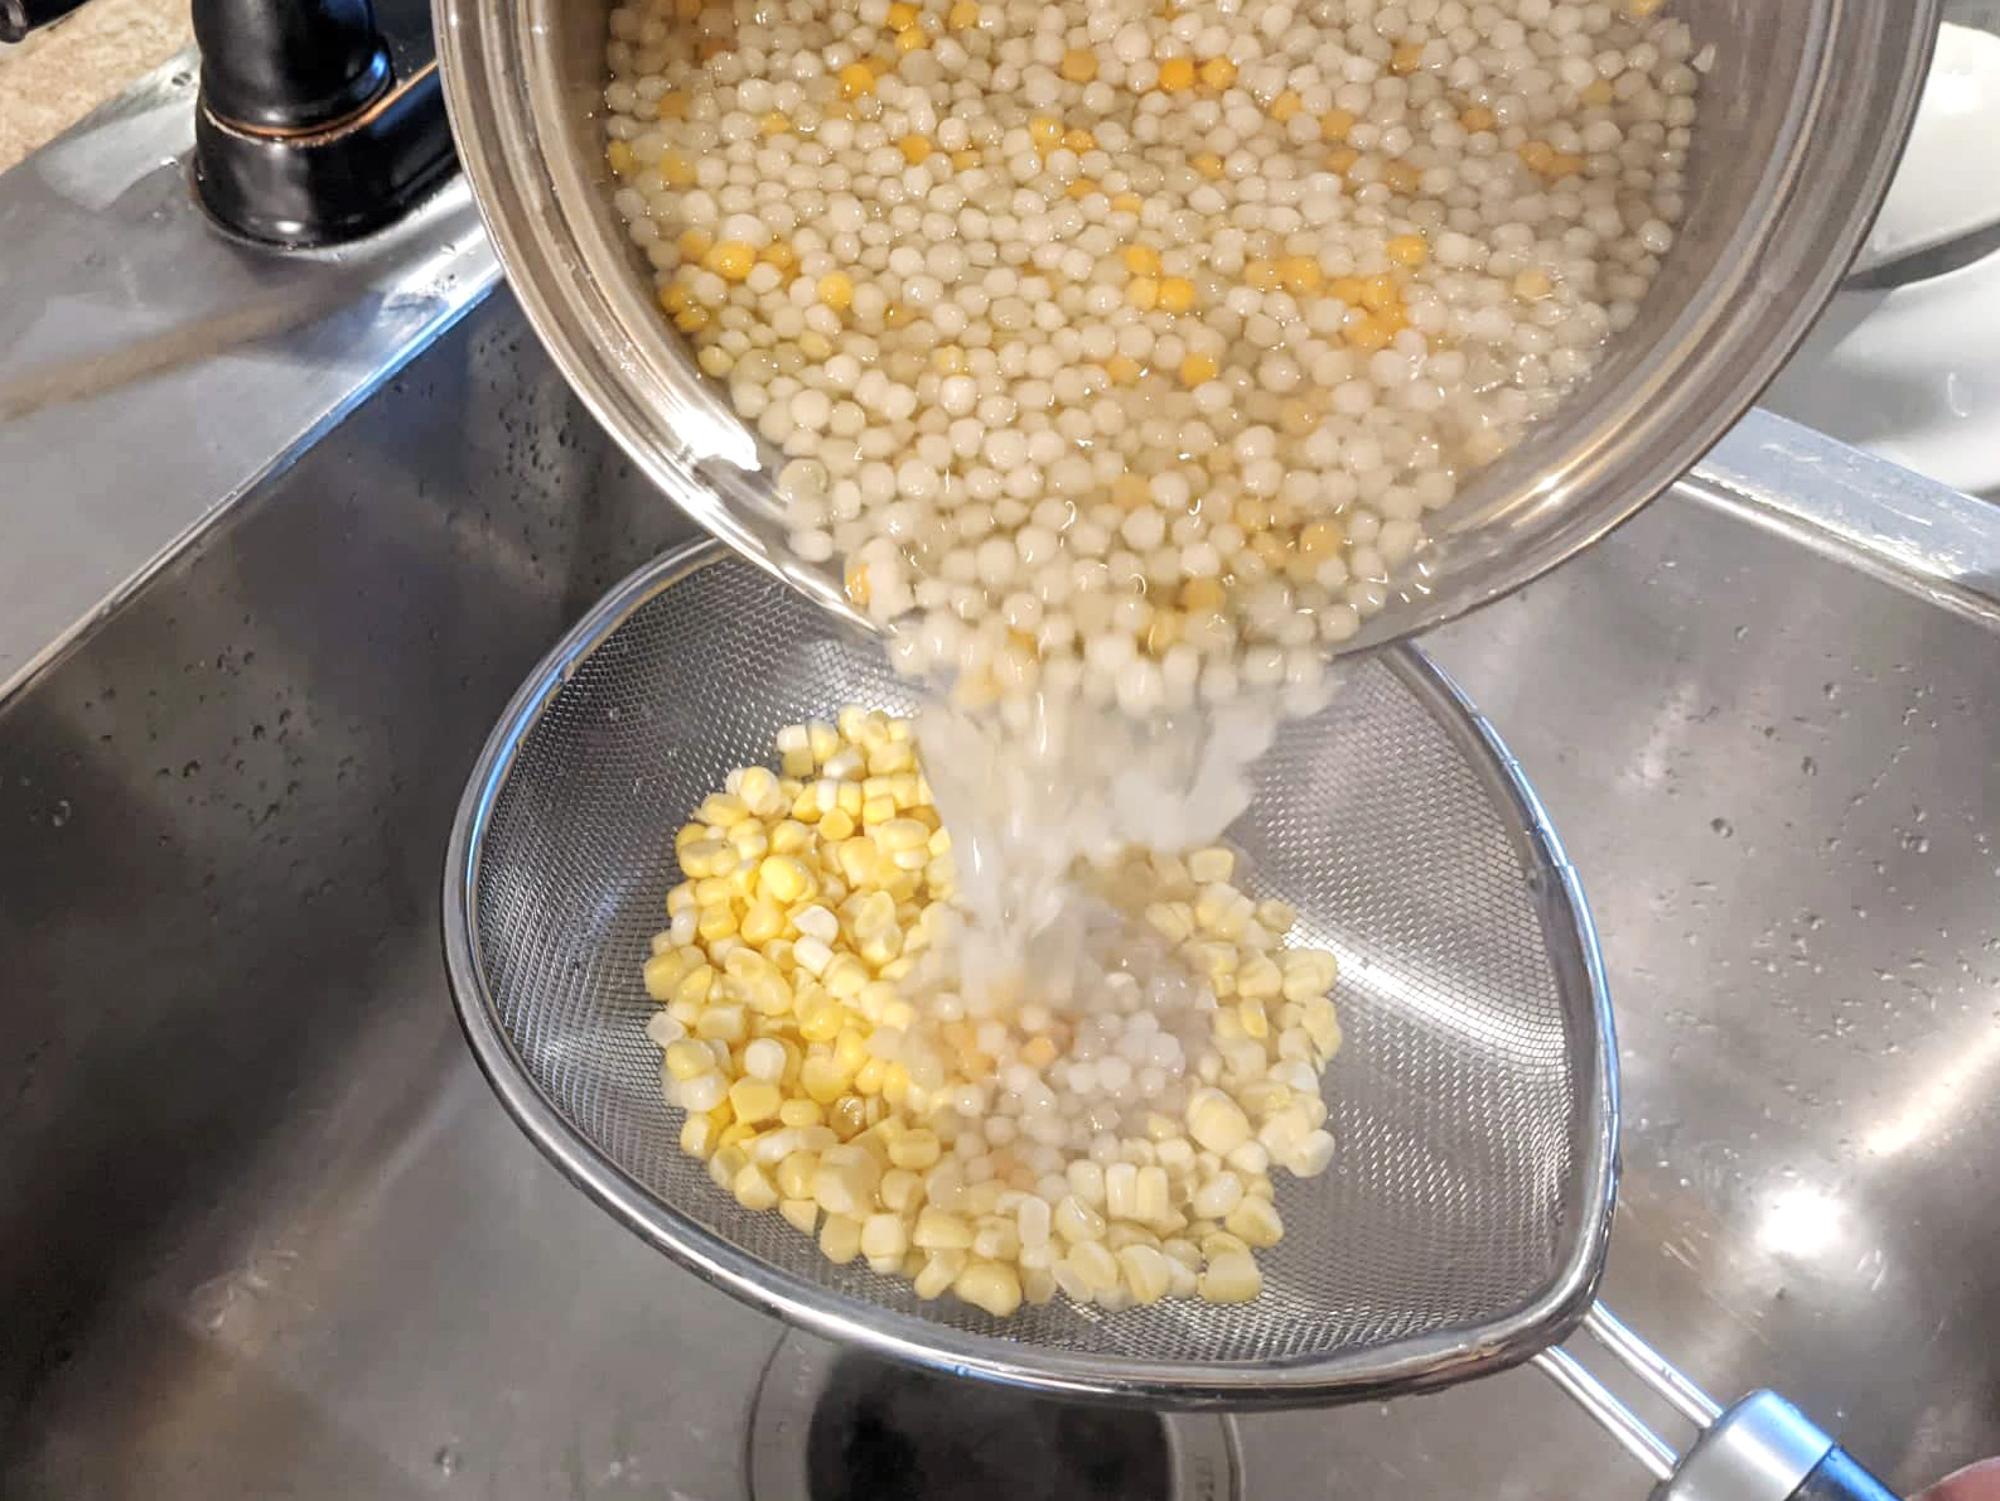 Pouring the hot couscous over the corn.